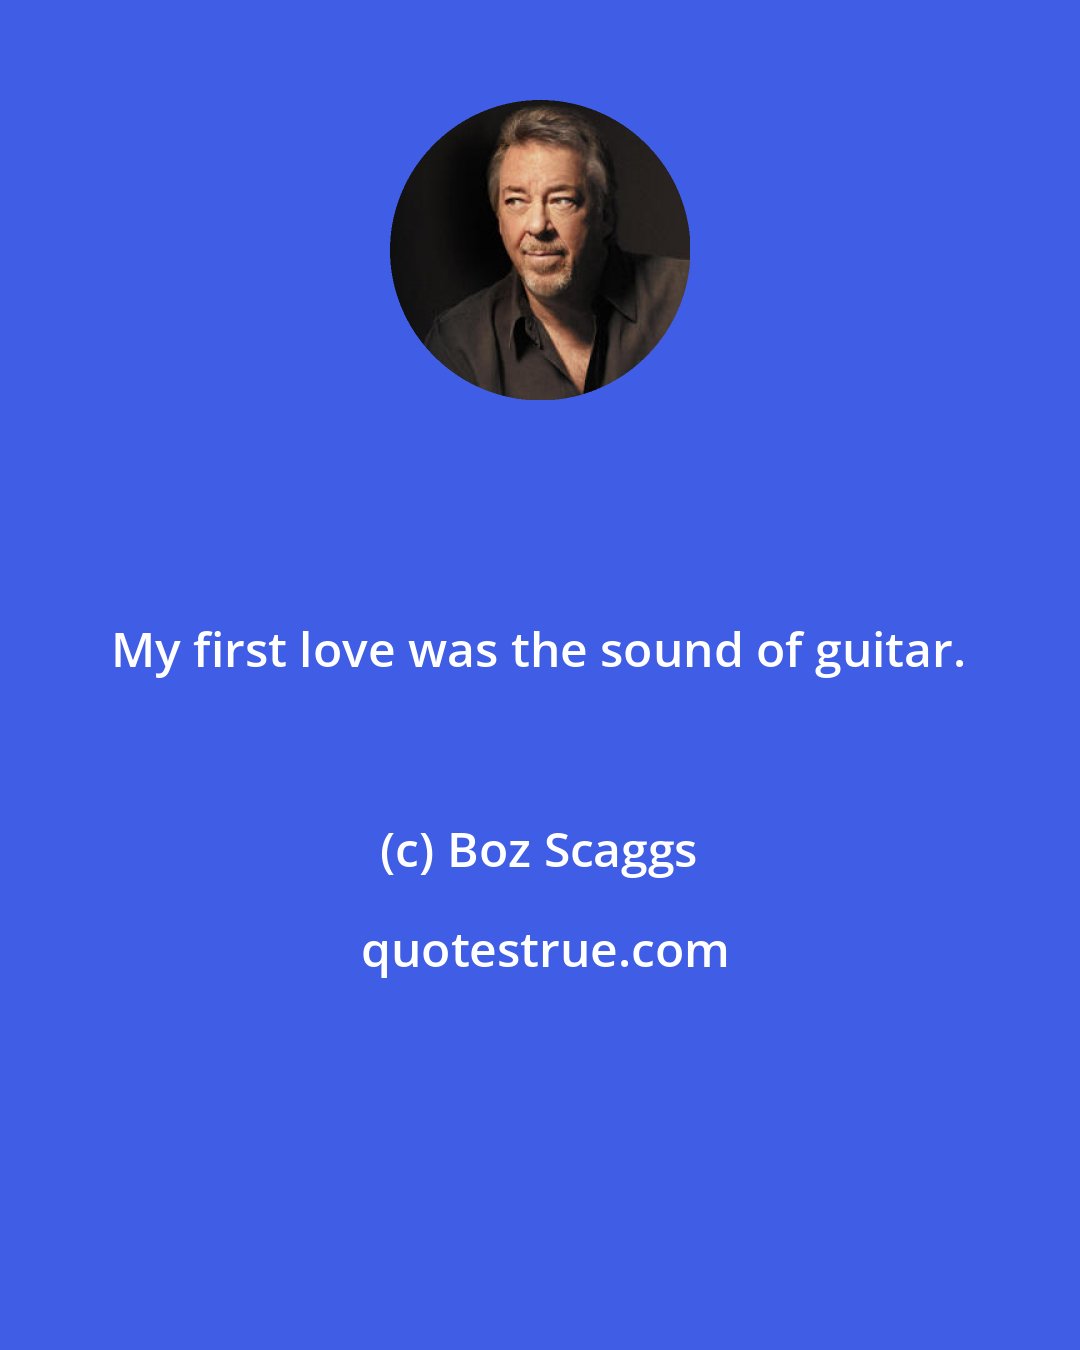 Boz Scaggs: My first love was the sound of guitar.